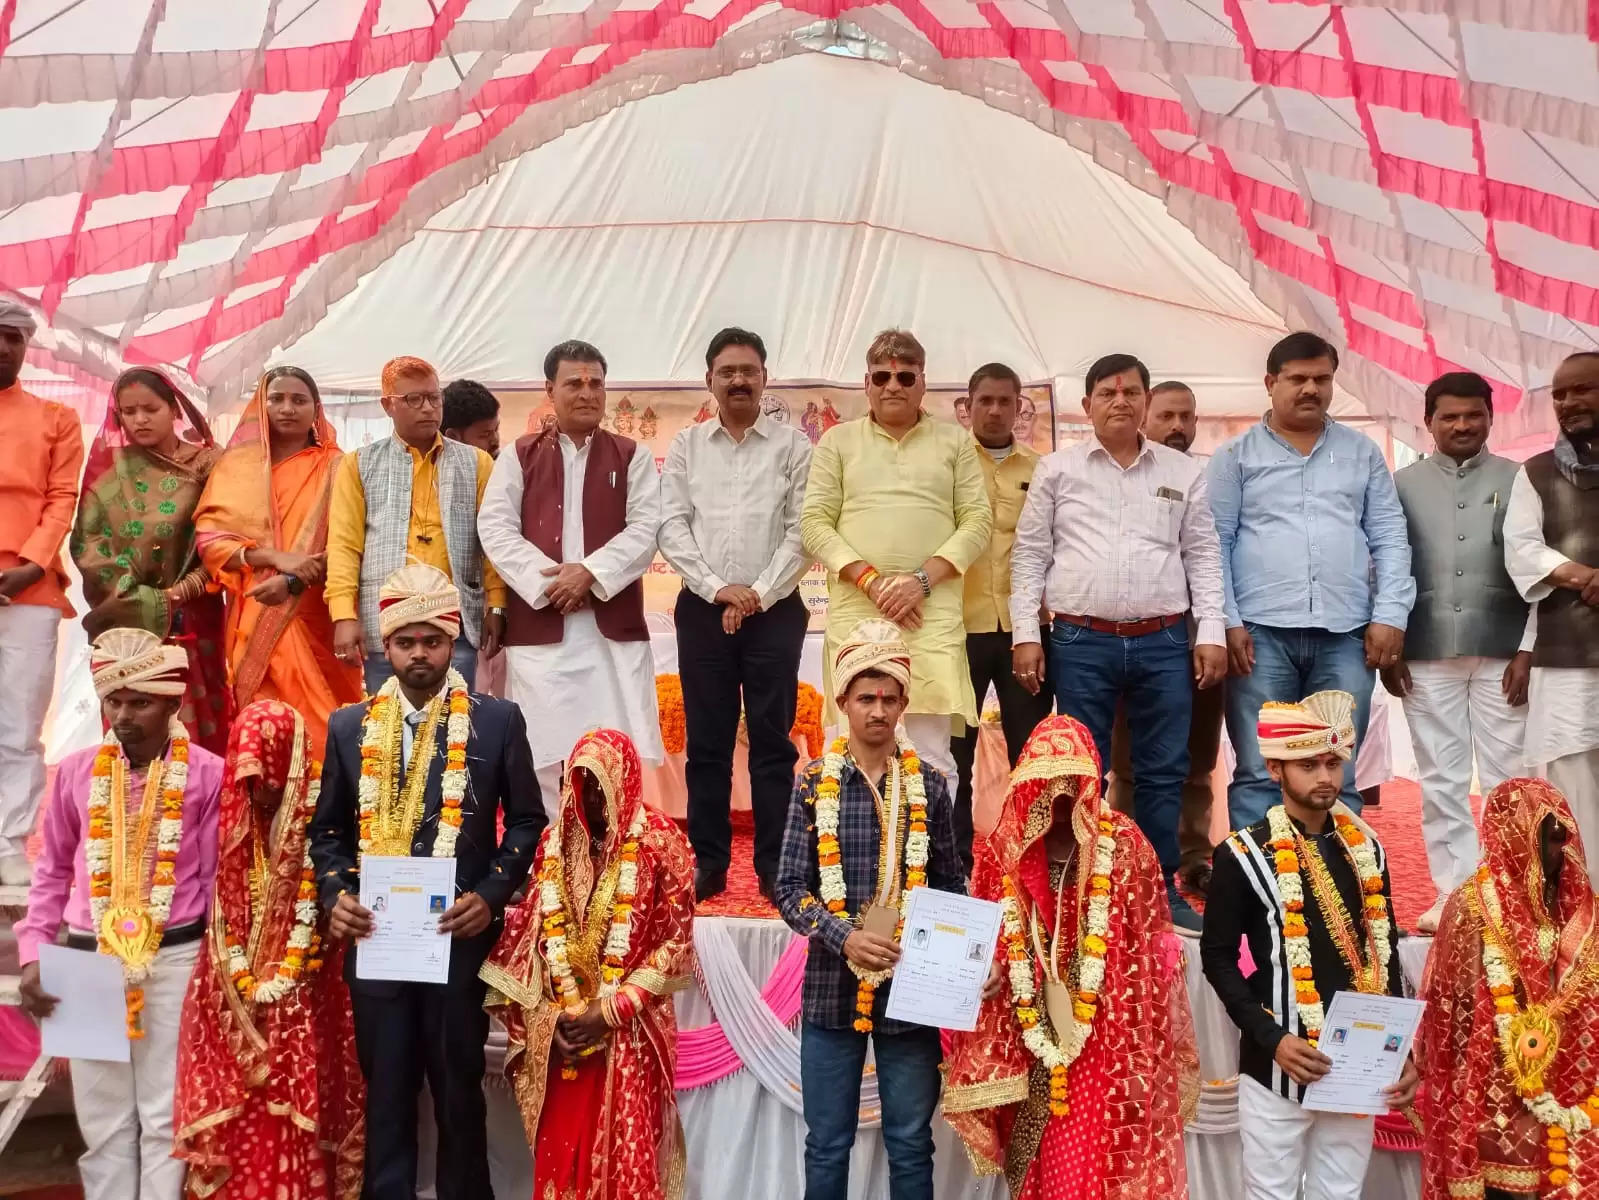 43 couples took seven rounds under Chief Minister's mass marriage scheme